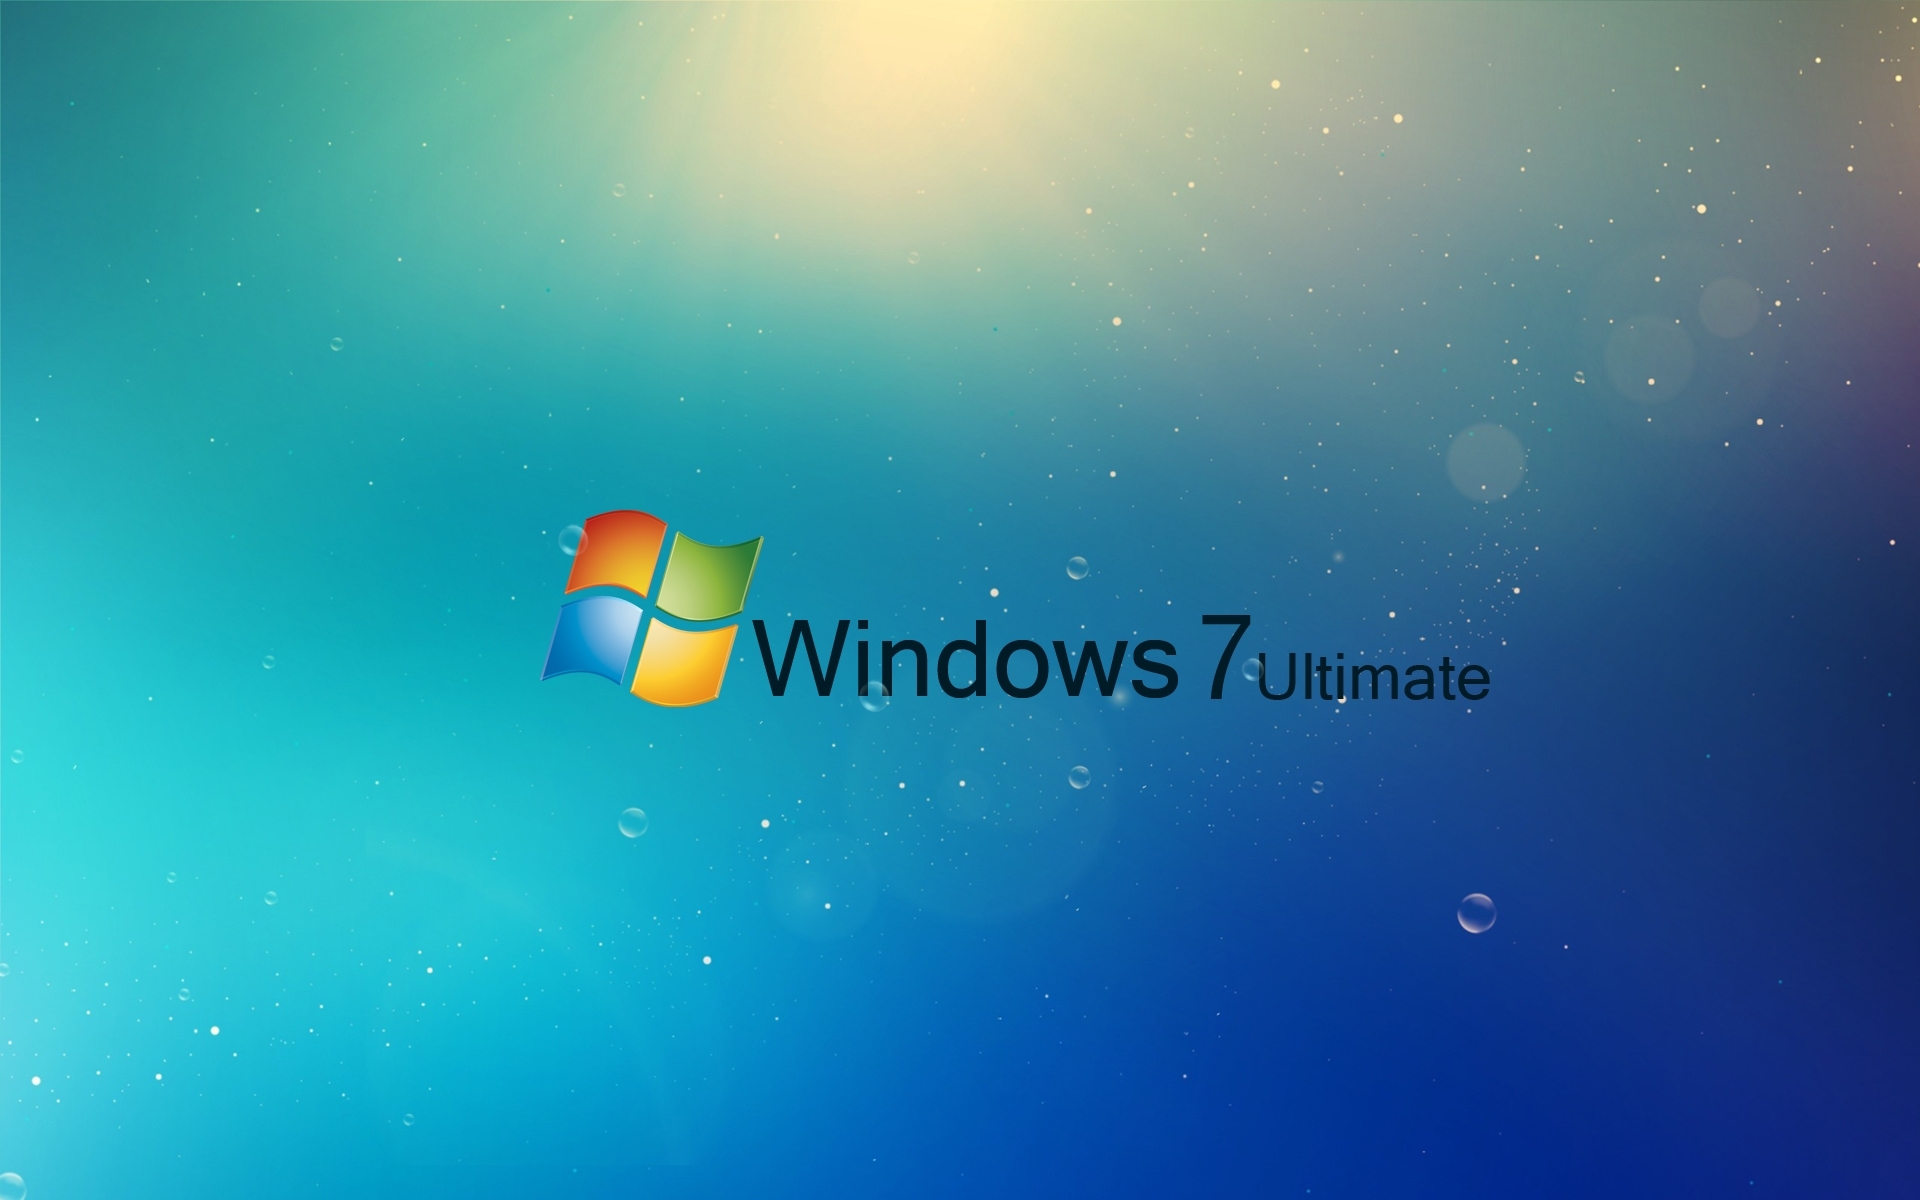 HD Blue Abstract Wallpaper For Windows Ultimate